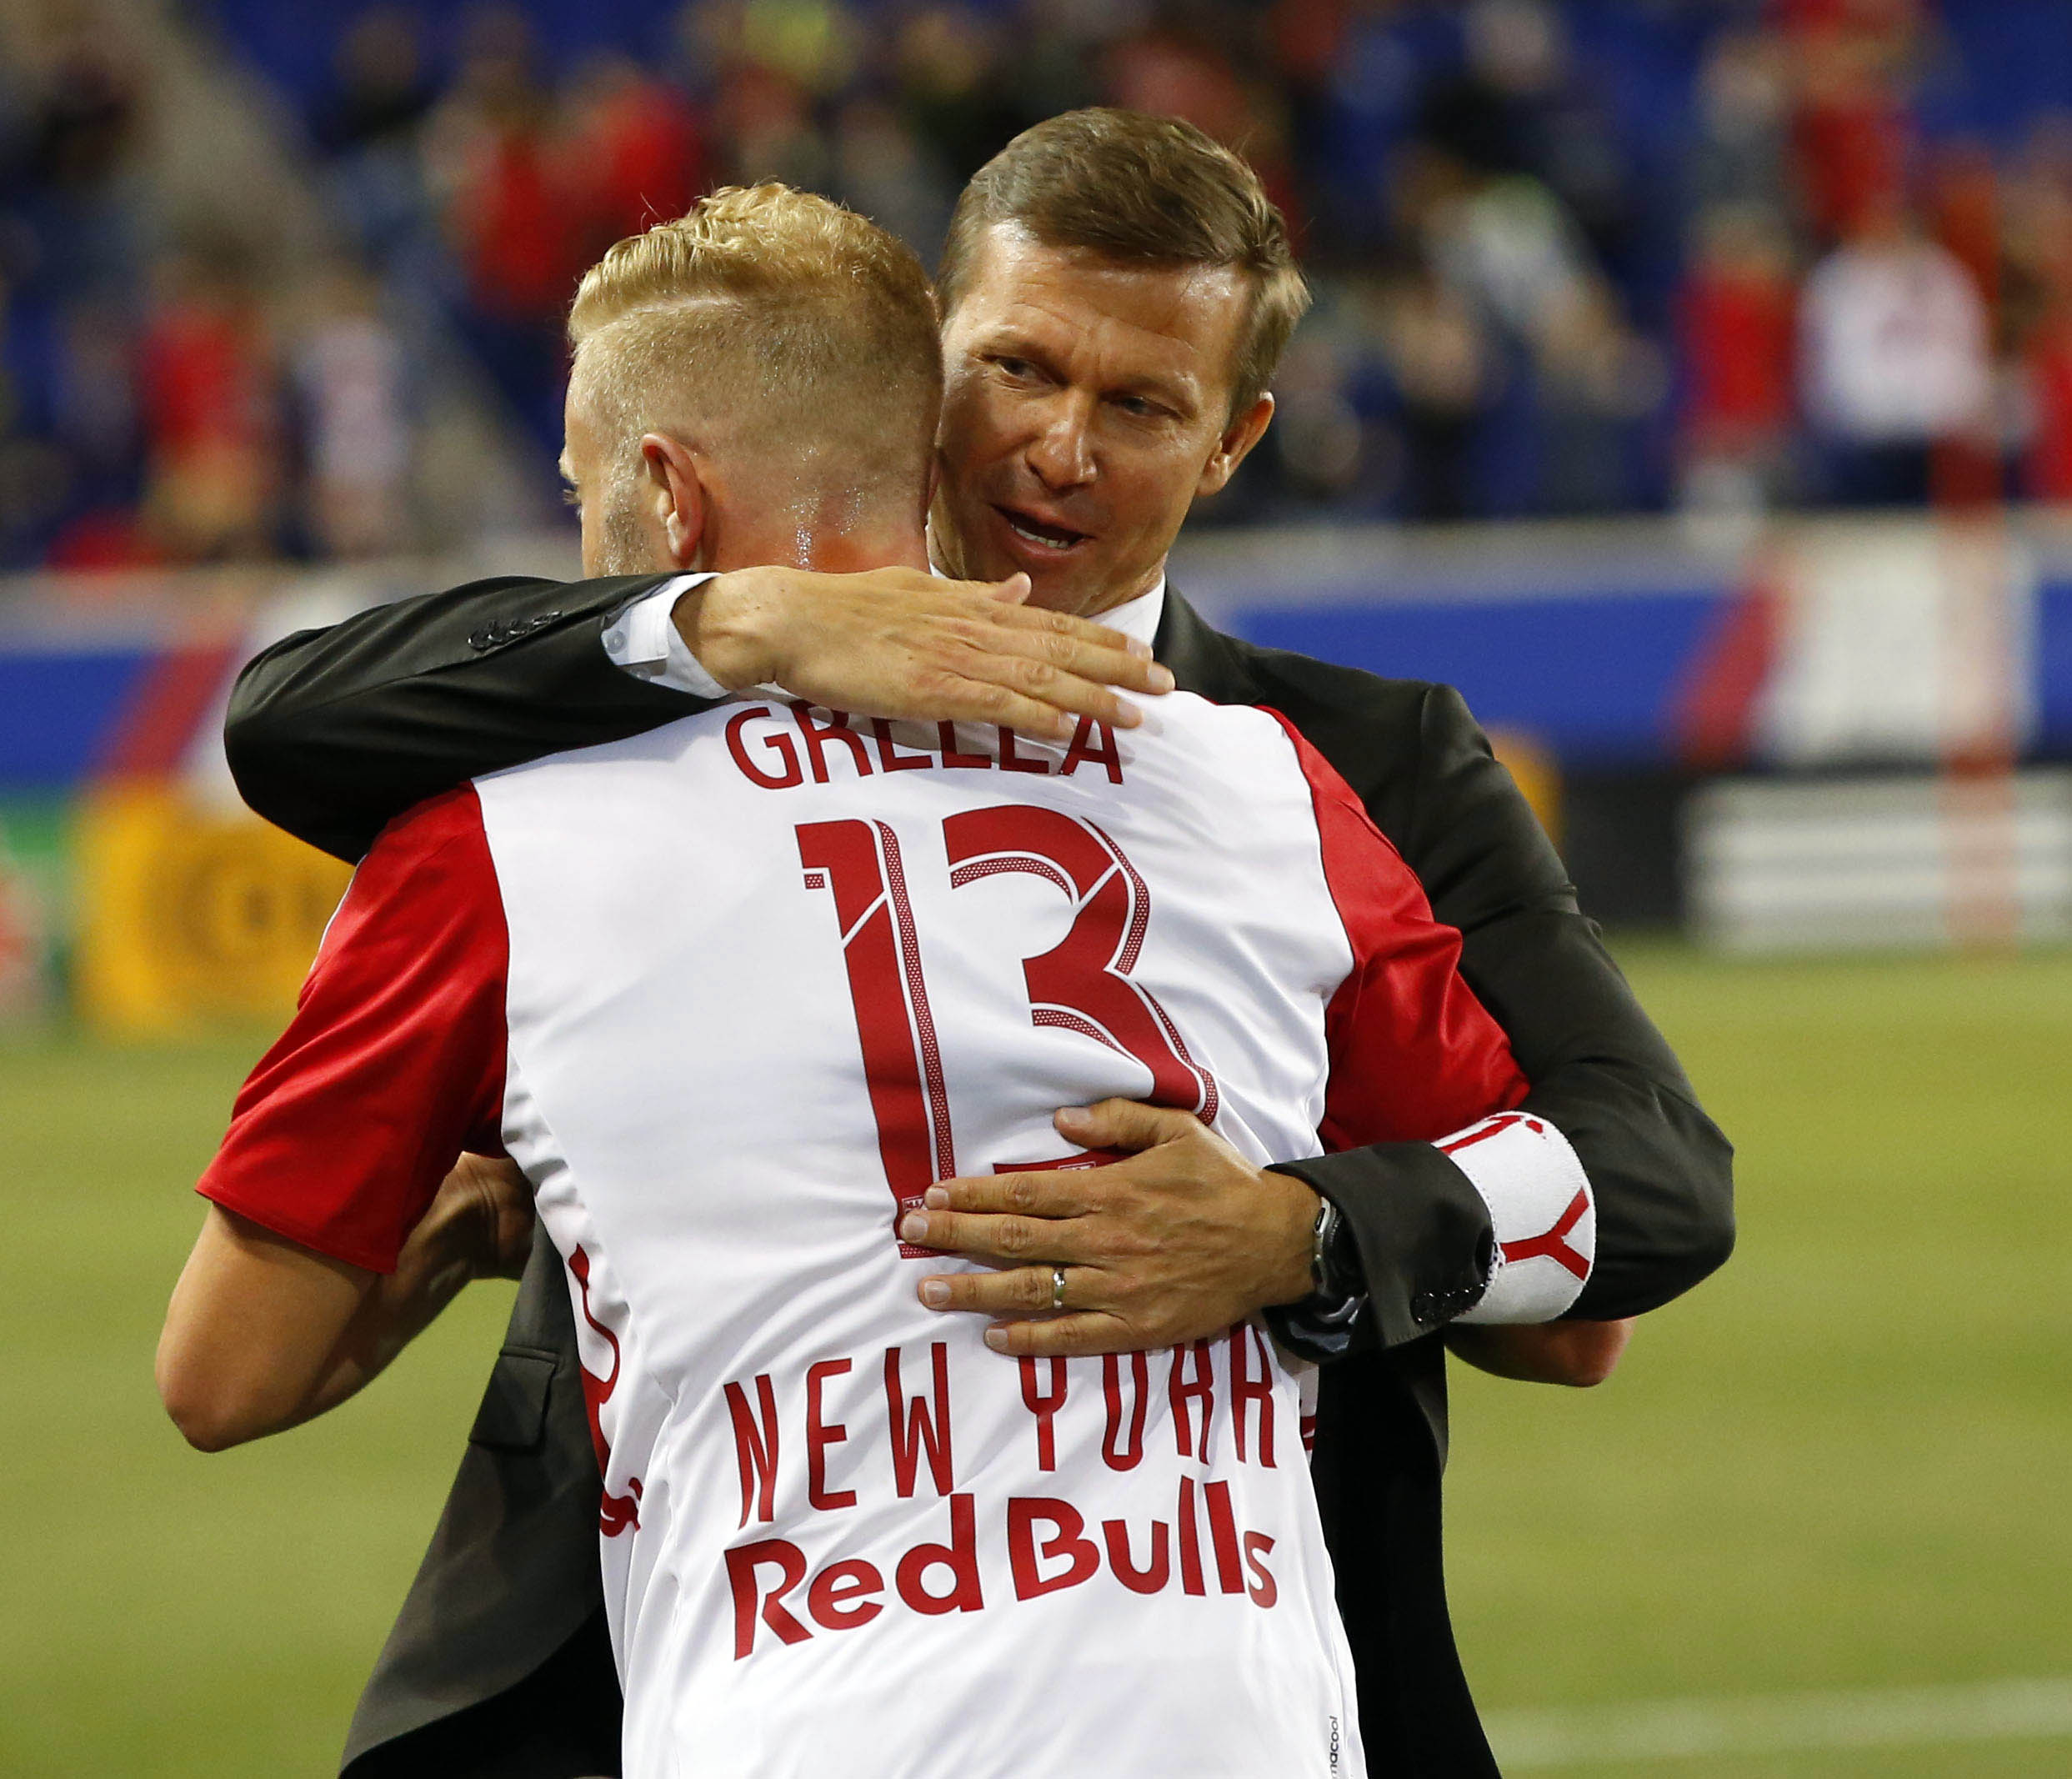 May 18, 2016; Harrison, NJ, USA; New York Red Bulls head coach Jesse Marsch congratulates New York Red Bulls forward Mike Grella (13) after scoring goal against Chicago Fire during second half at Red Bull Arena. The New York Red Bulls defeated Chicago Fire 1-0. Mandatory Credit: Noah K. Murray-USA TODAY Sports